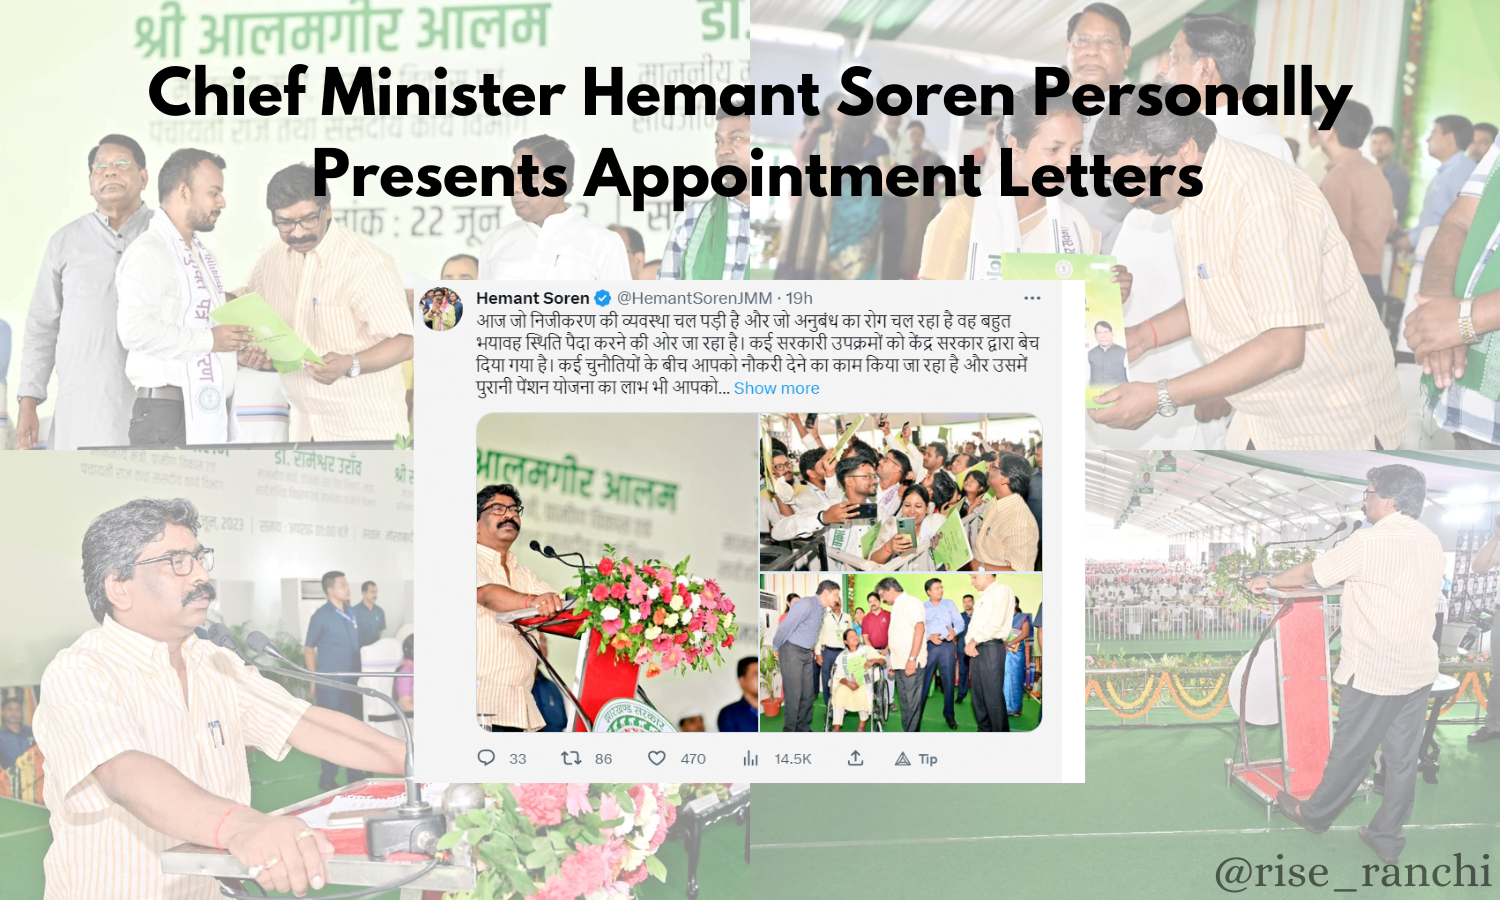 Hemant Soren-led Jharkhand Government Distributes Appointment Letters, Alleviating Employment Struggles